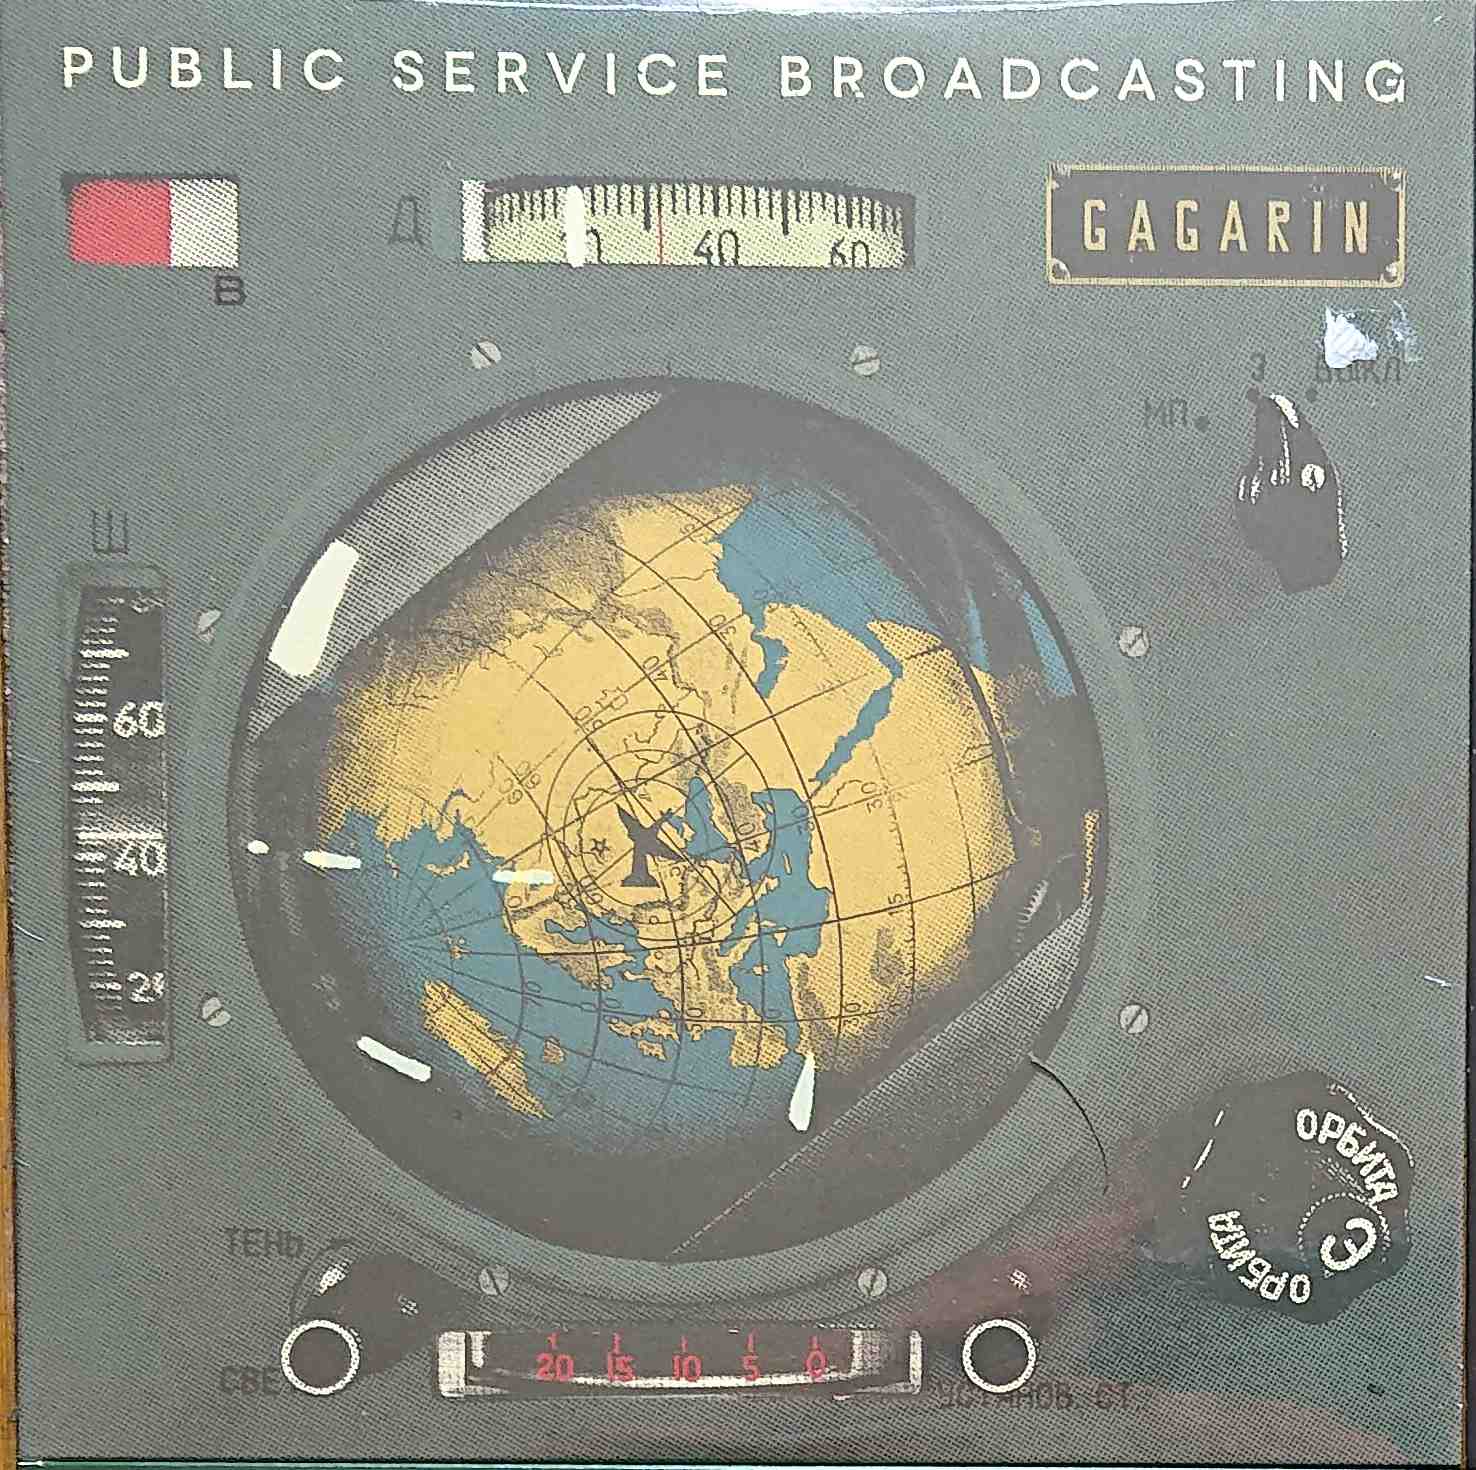 Picture of Public service broadcasting by artist J. Willgoose from ITV, Channel 4 and Channel 5 singles library